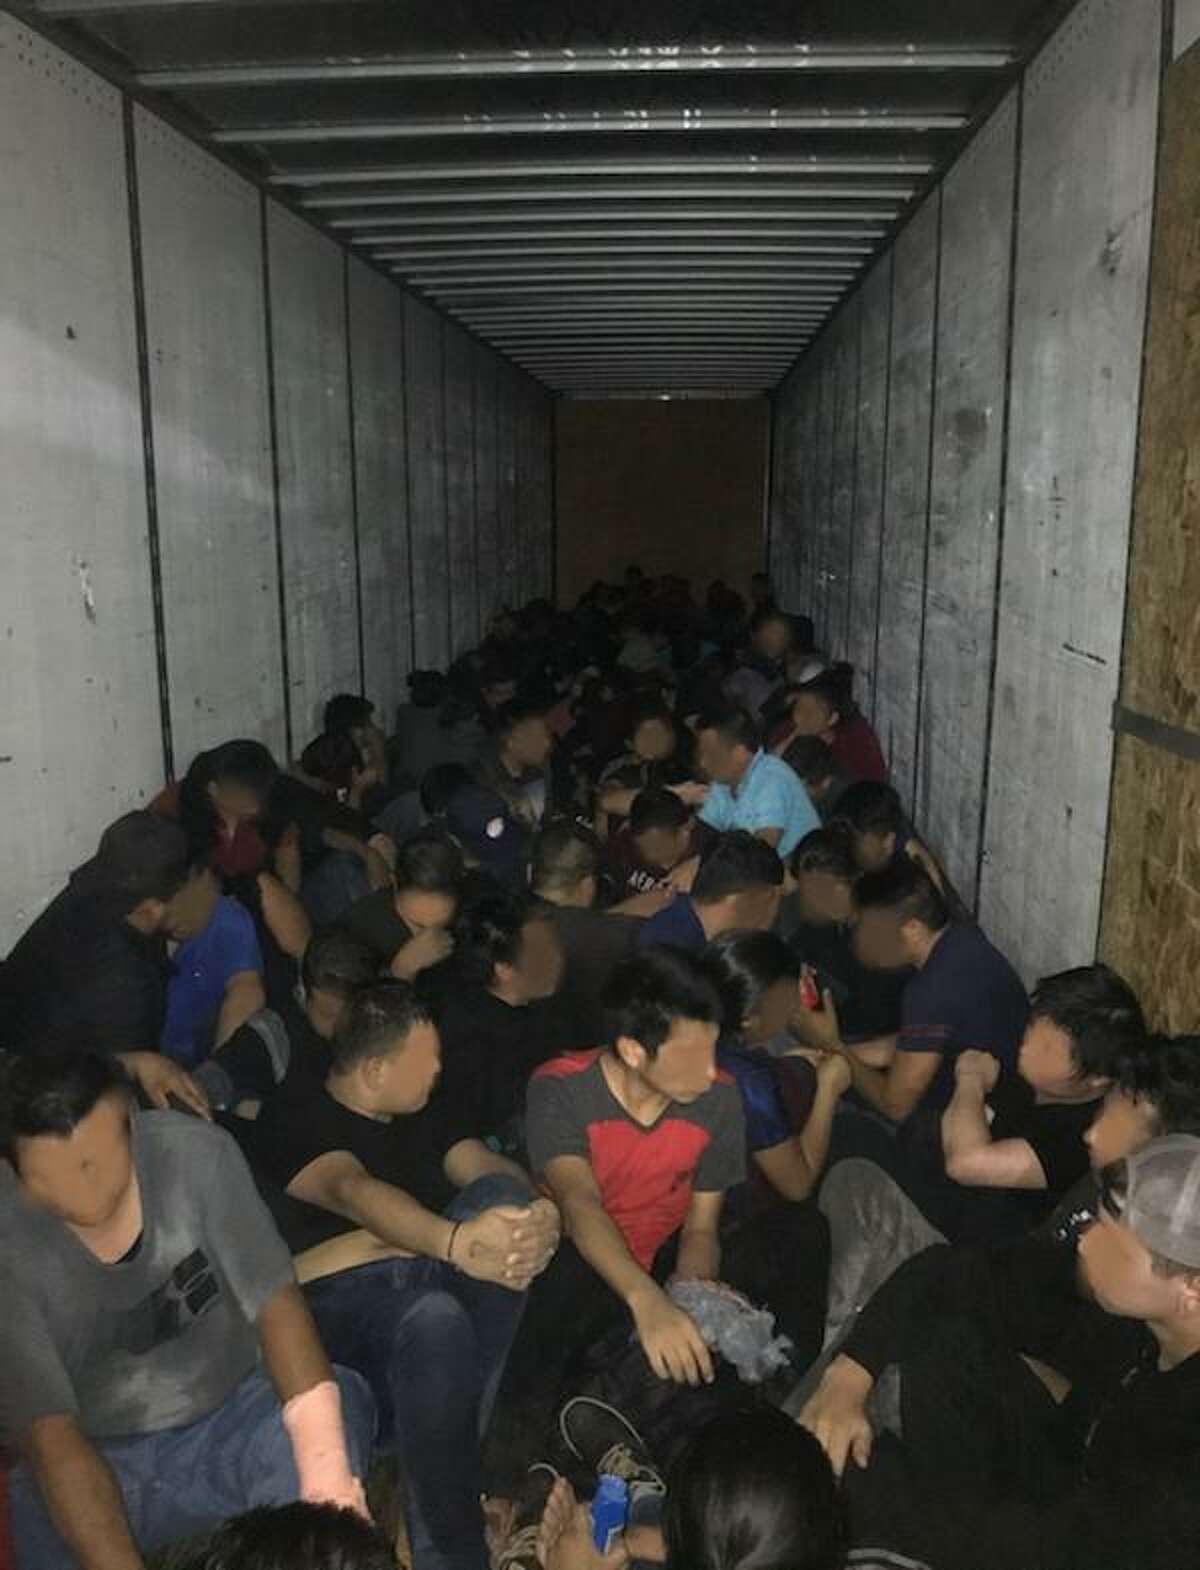 U.S. Border Patrol discovered 89 individuals inside an 18-wheeler on July 13. All were determined to be migrants who were in the country illegally. Two people were arrested in connection with the case.